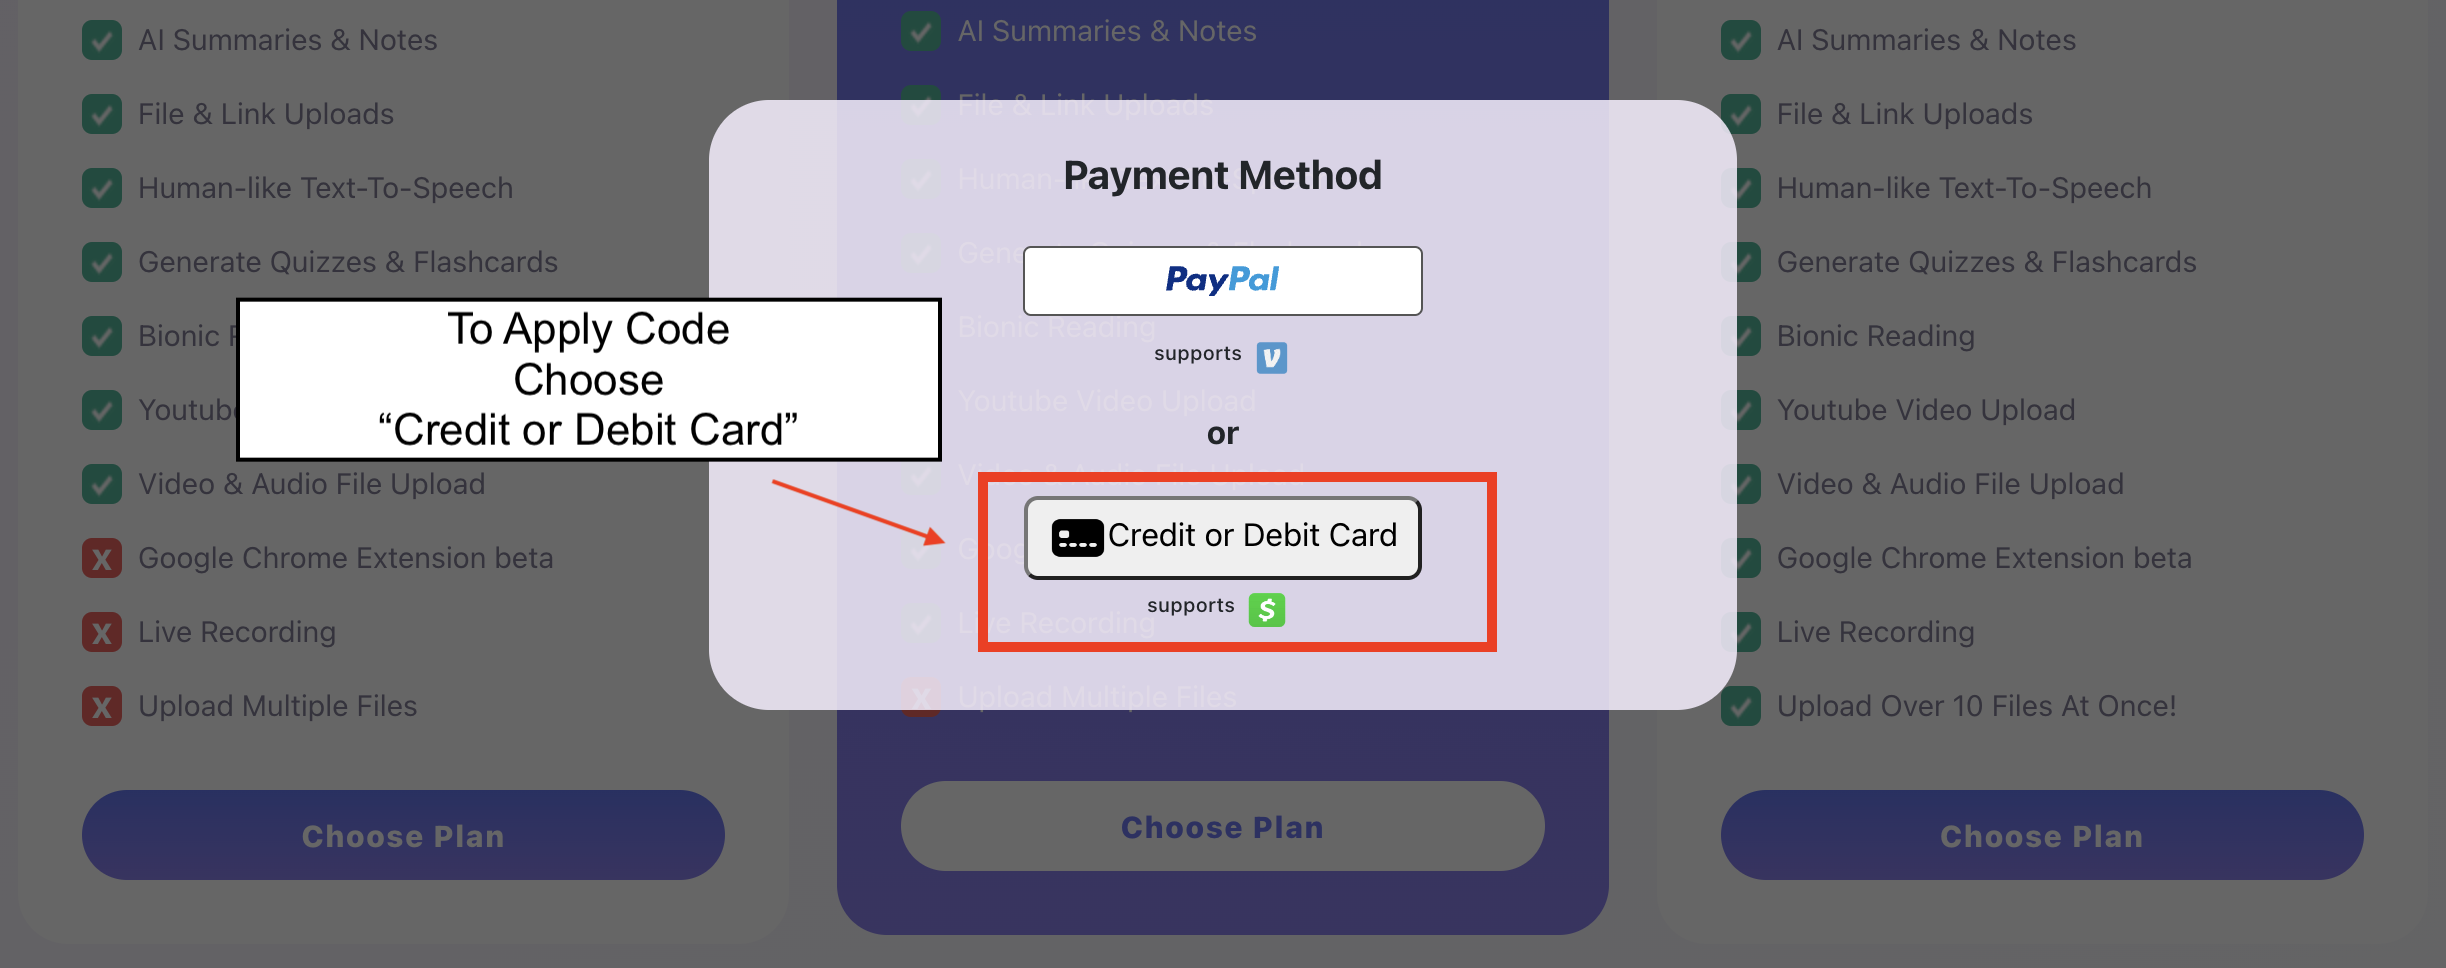 Choose Payment Method.png